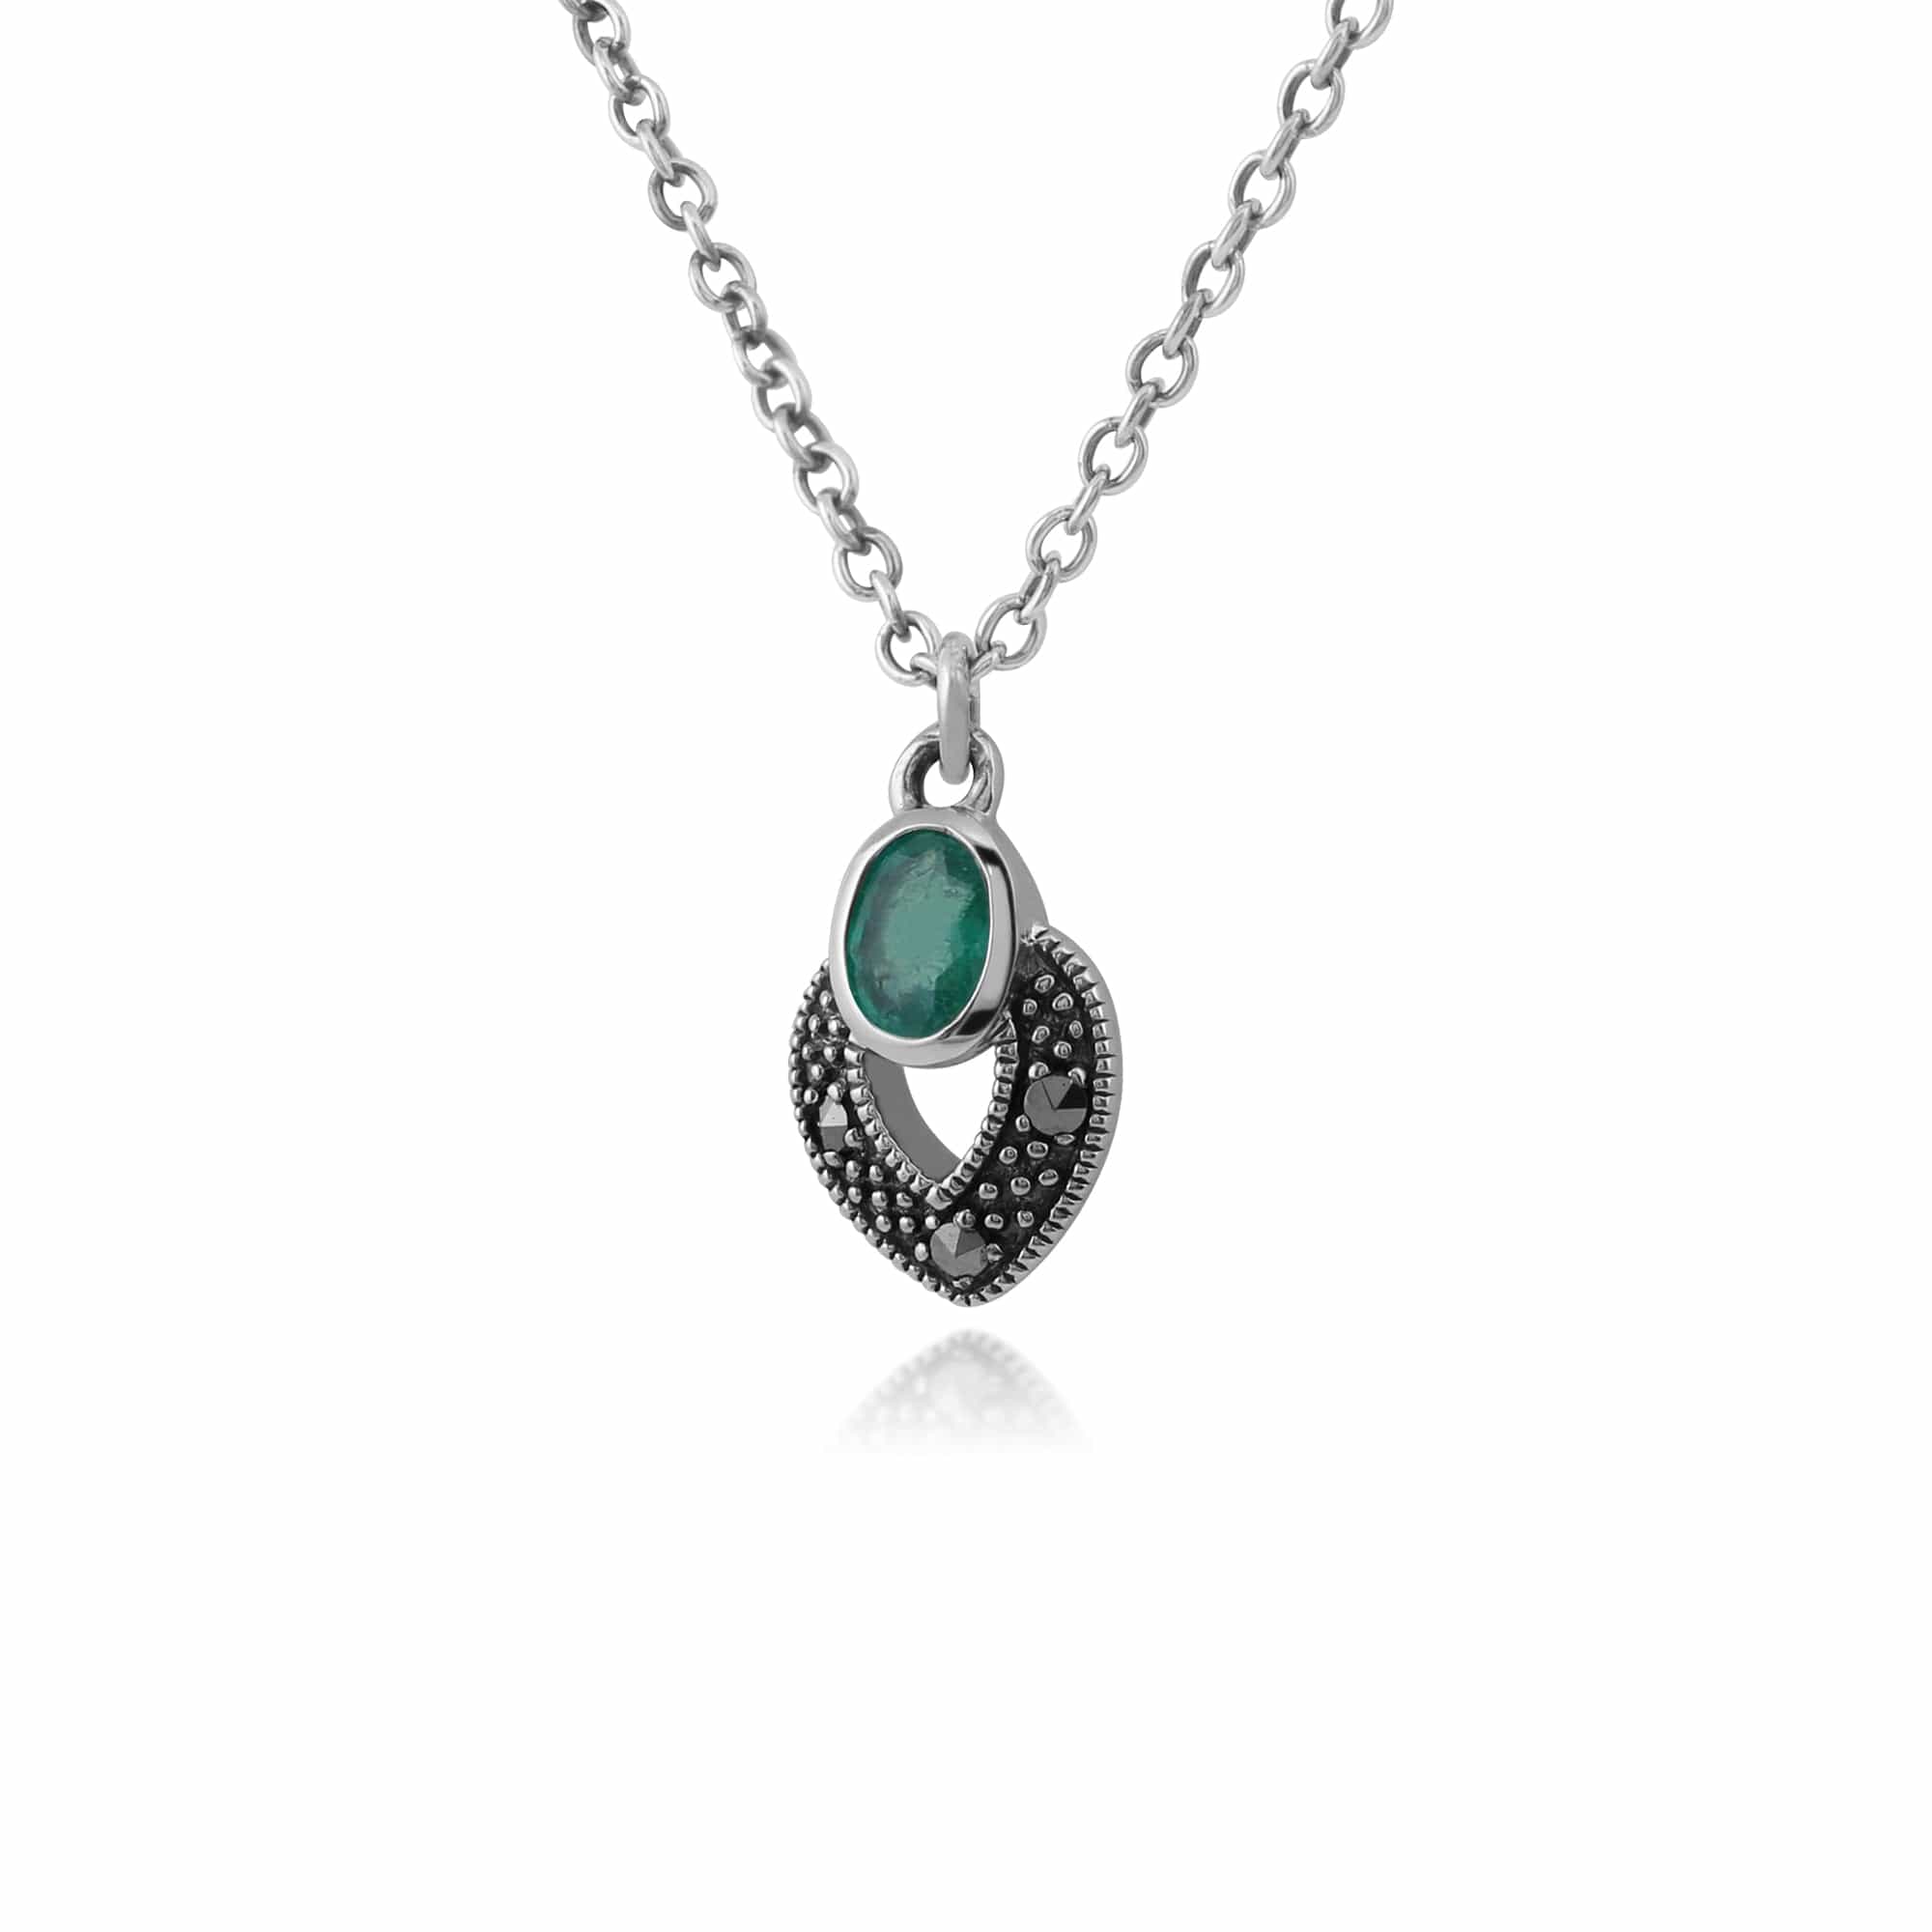 214N688210925 Art Deco Style Oval Emerald & Marcasite Necklace in 925 Sterling Silver 2